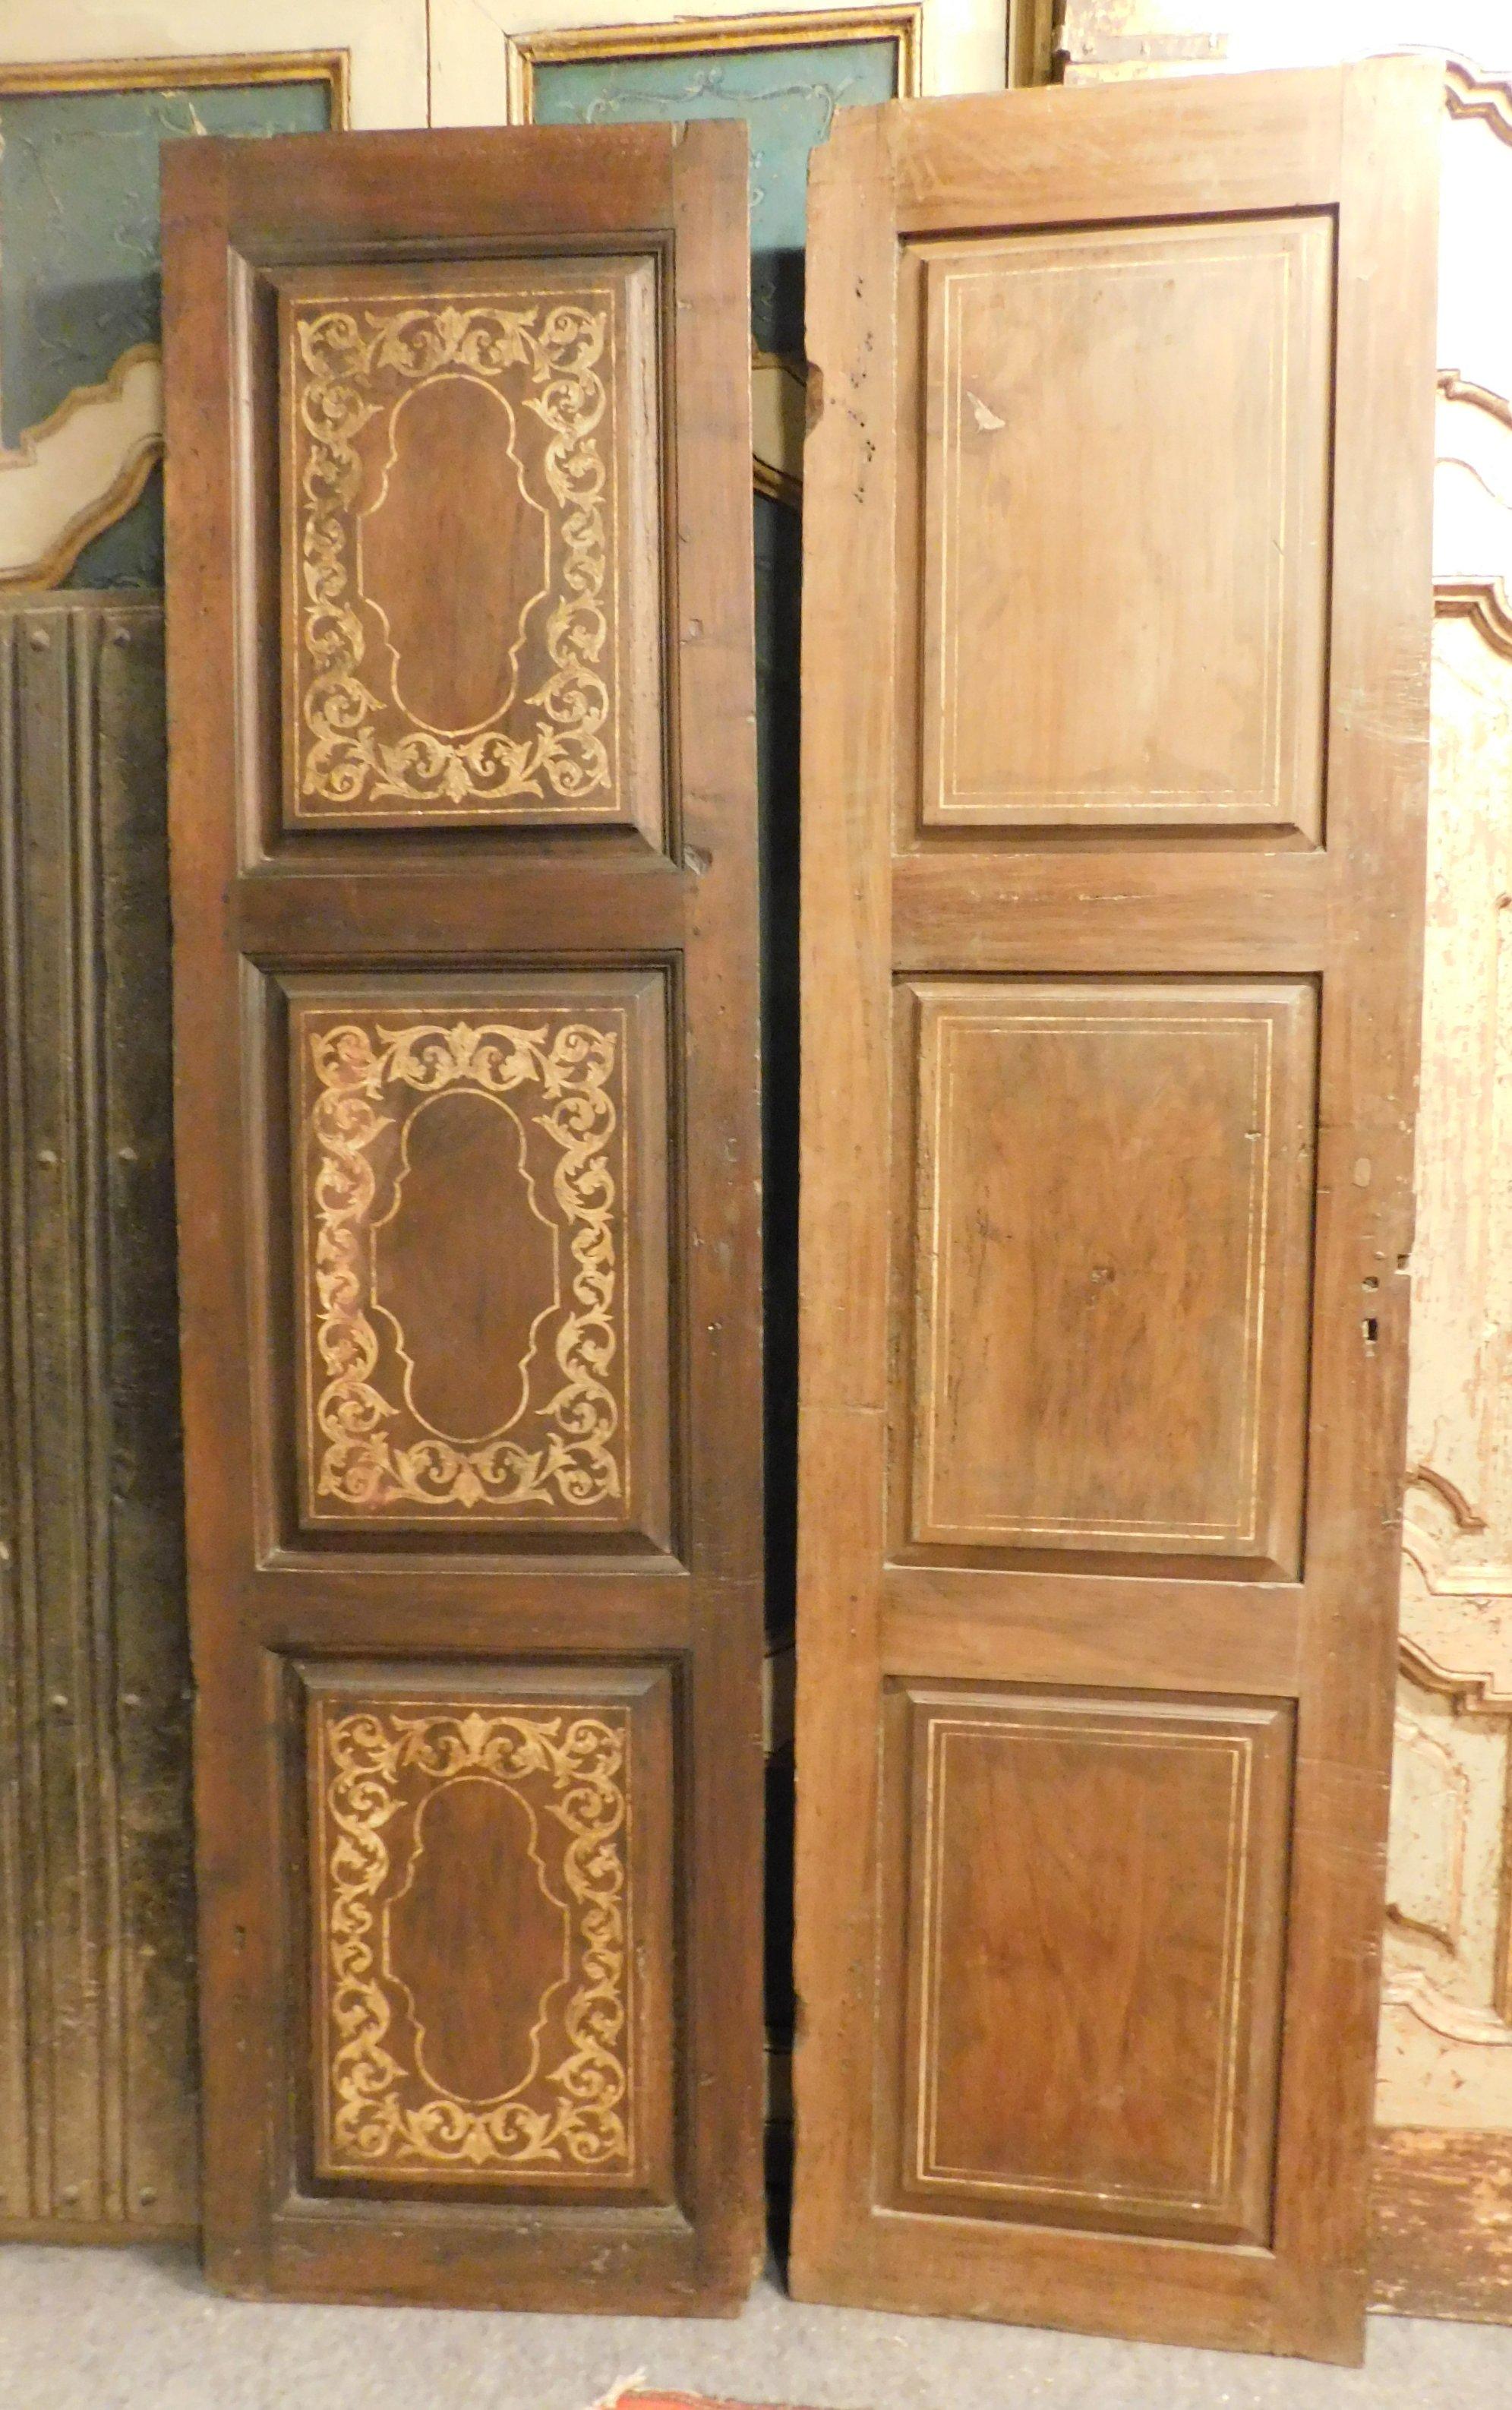 Antique Walnut Double Door, Two Wings Light/Dark Inlays, 18th Century, Italy For Sale 2